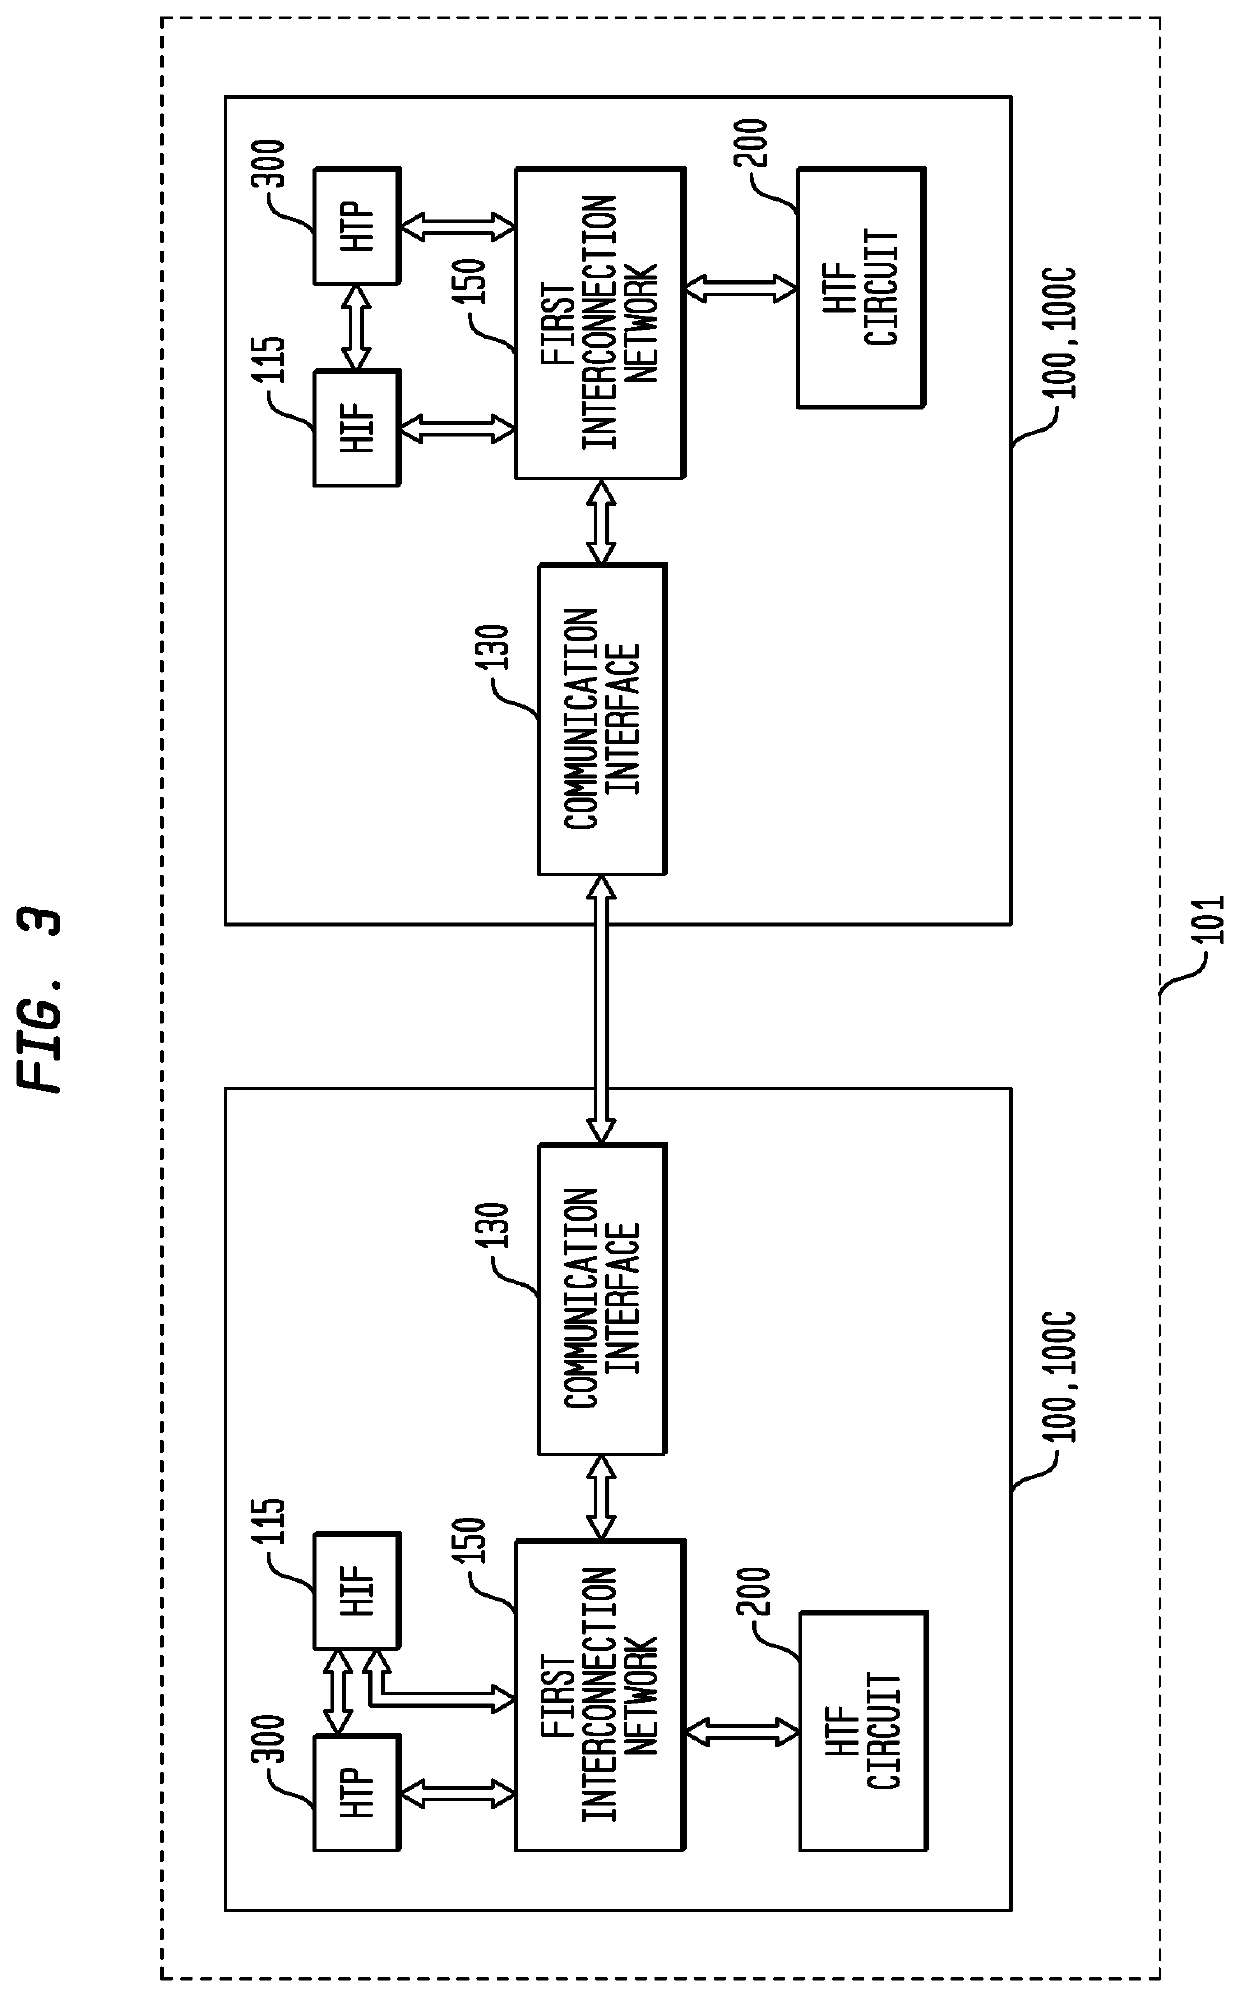 System Call Management in a User-Mode, Multi-Threaded, Self-Scheduling Processor